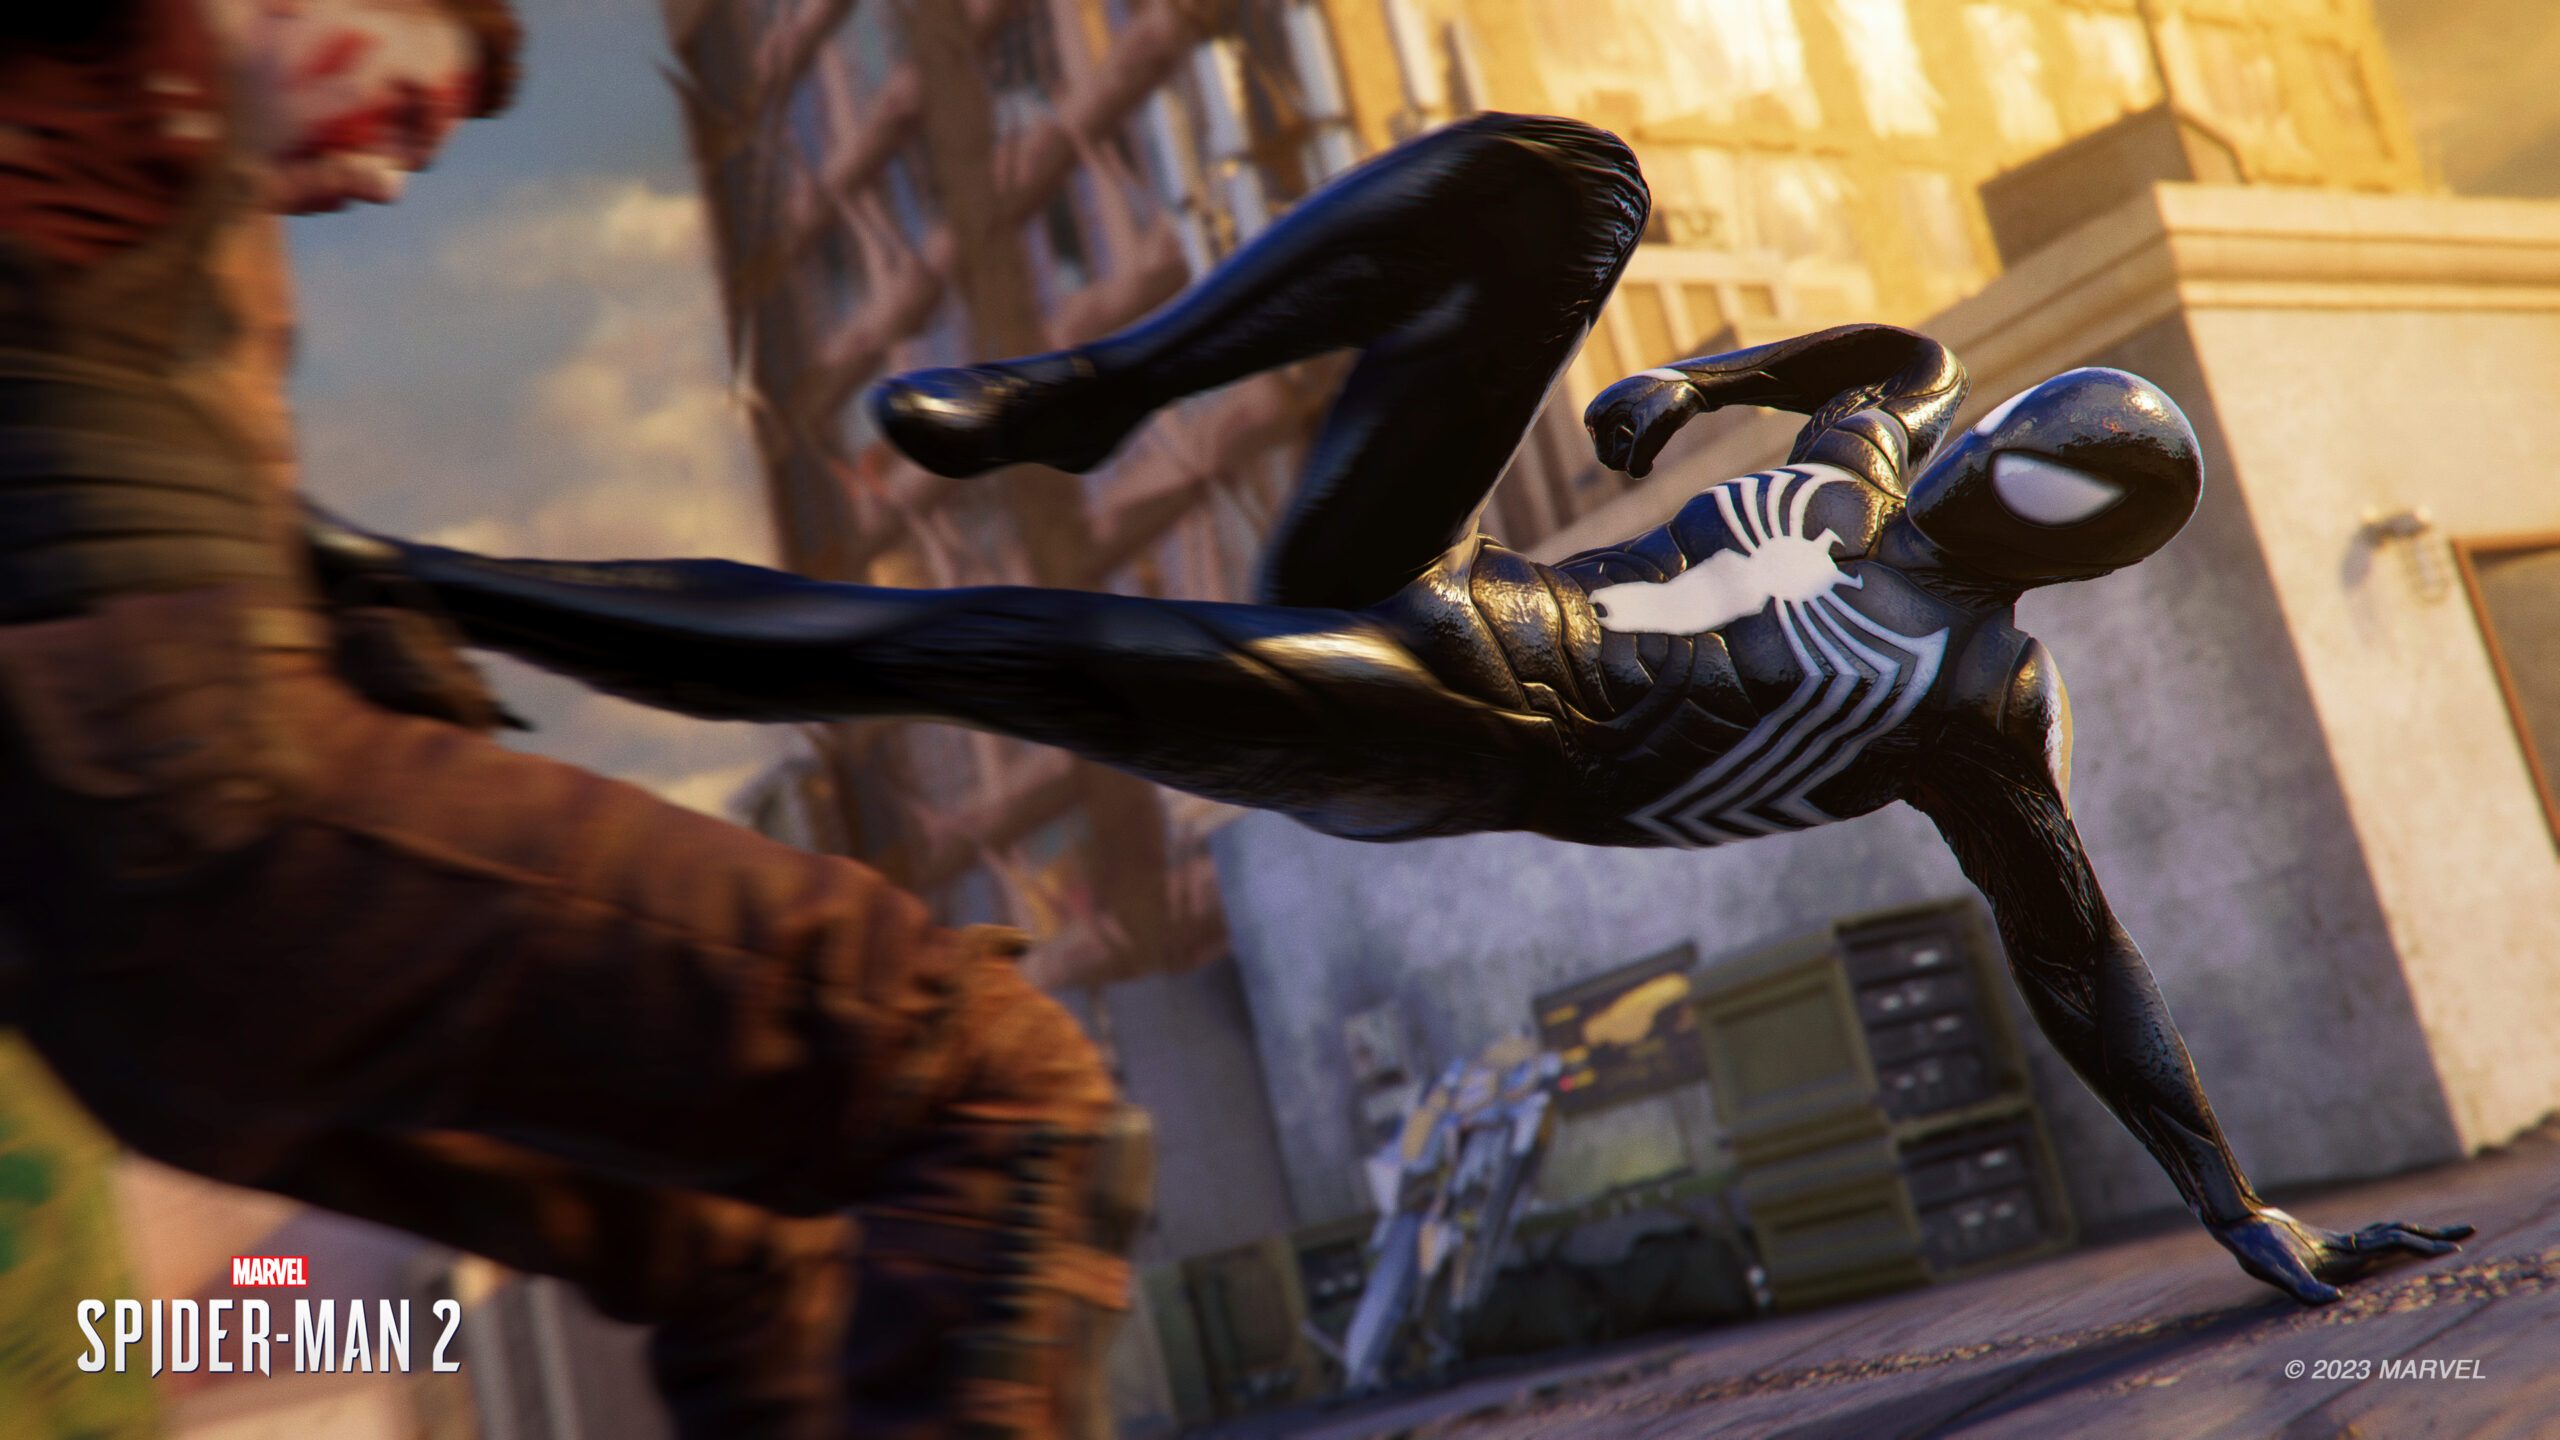 Amazing representation packs a punch in Marvel's Spider-Man 2